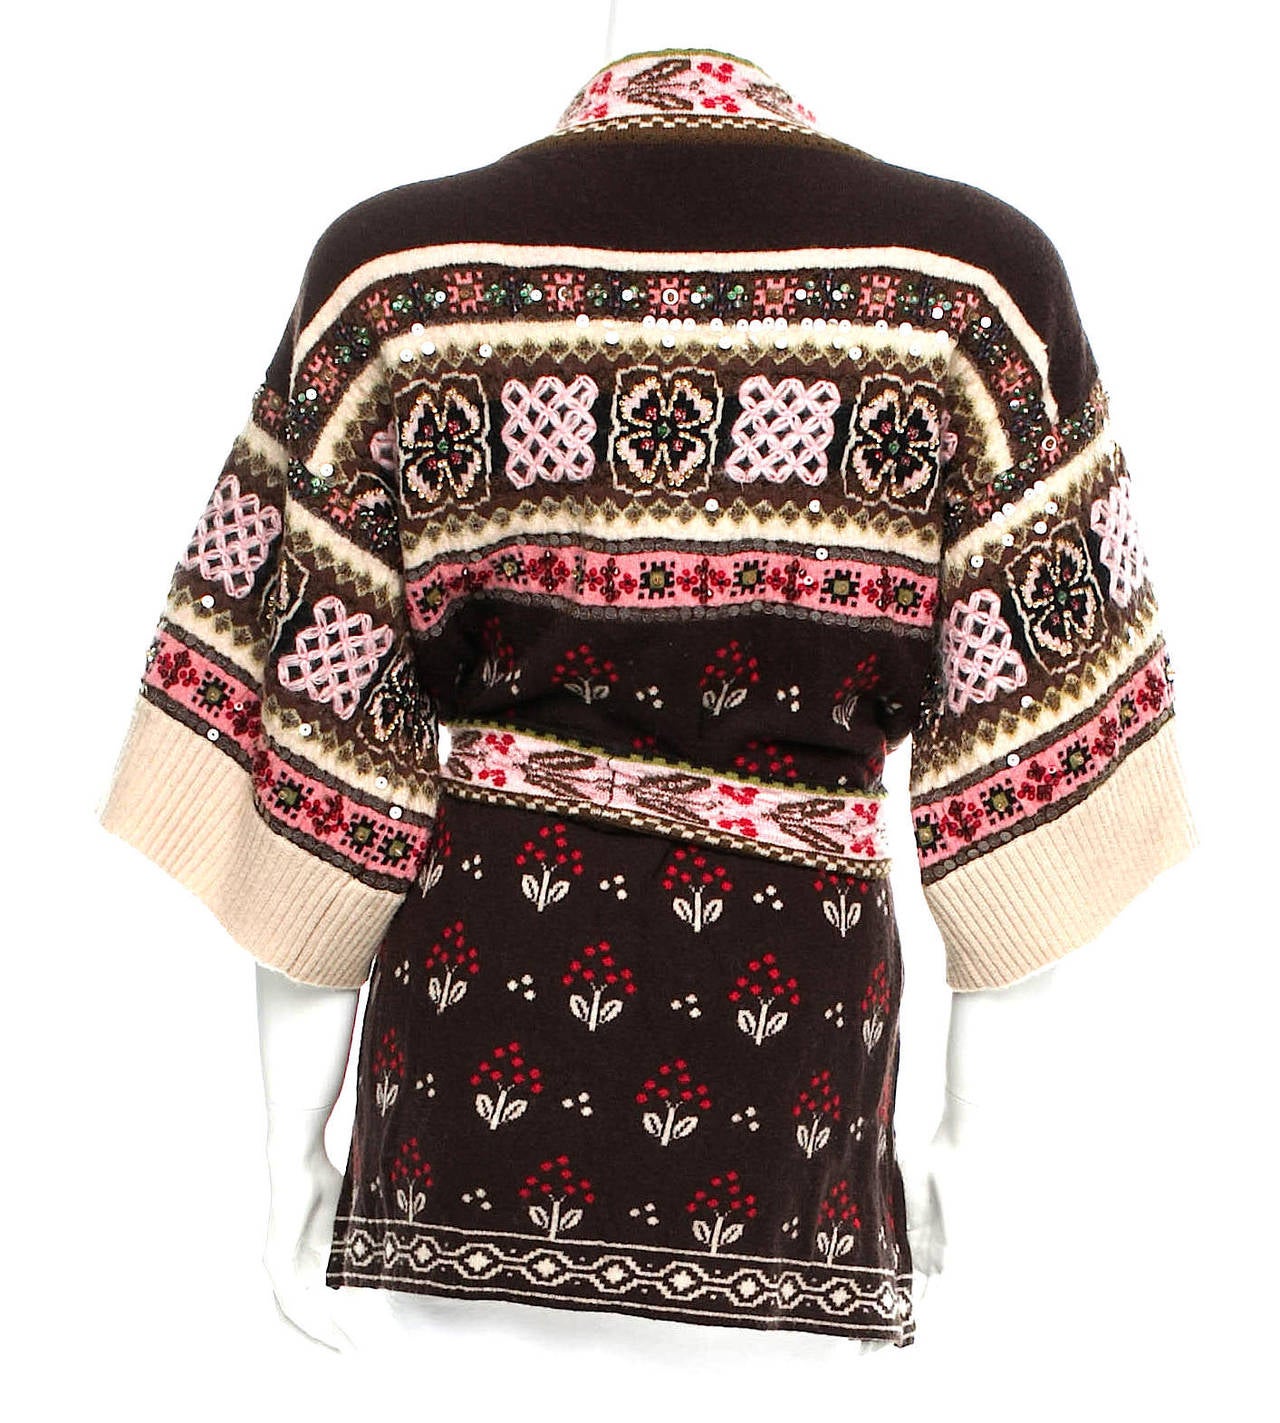 Kenzo vintage brown, tan, and pink multi-colored short sleeved cardigan with belt closure, embroidery, and sequin embellishments with flower motif. 
Measurements: Bust 36”, Waist 38”, Length 29” 
Fabric Content: 76% Wool, 20% Polyamide, 4%